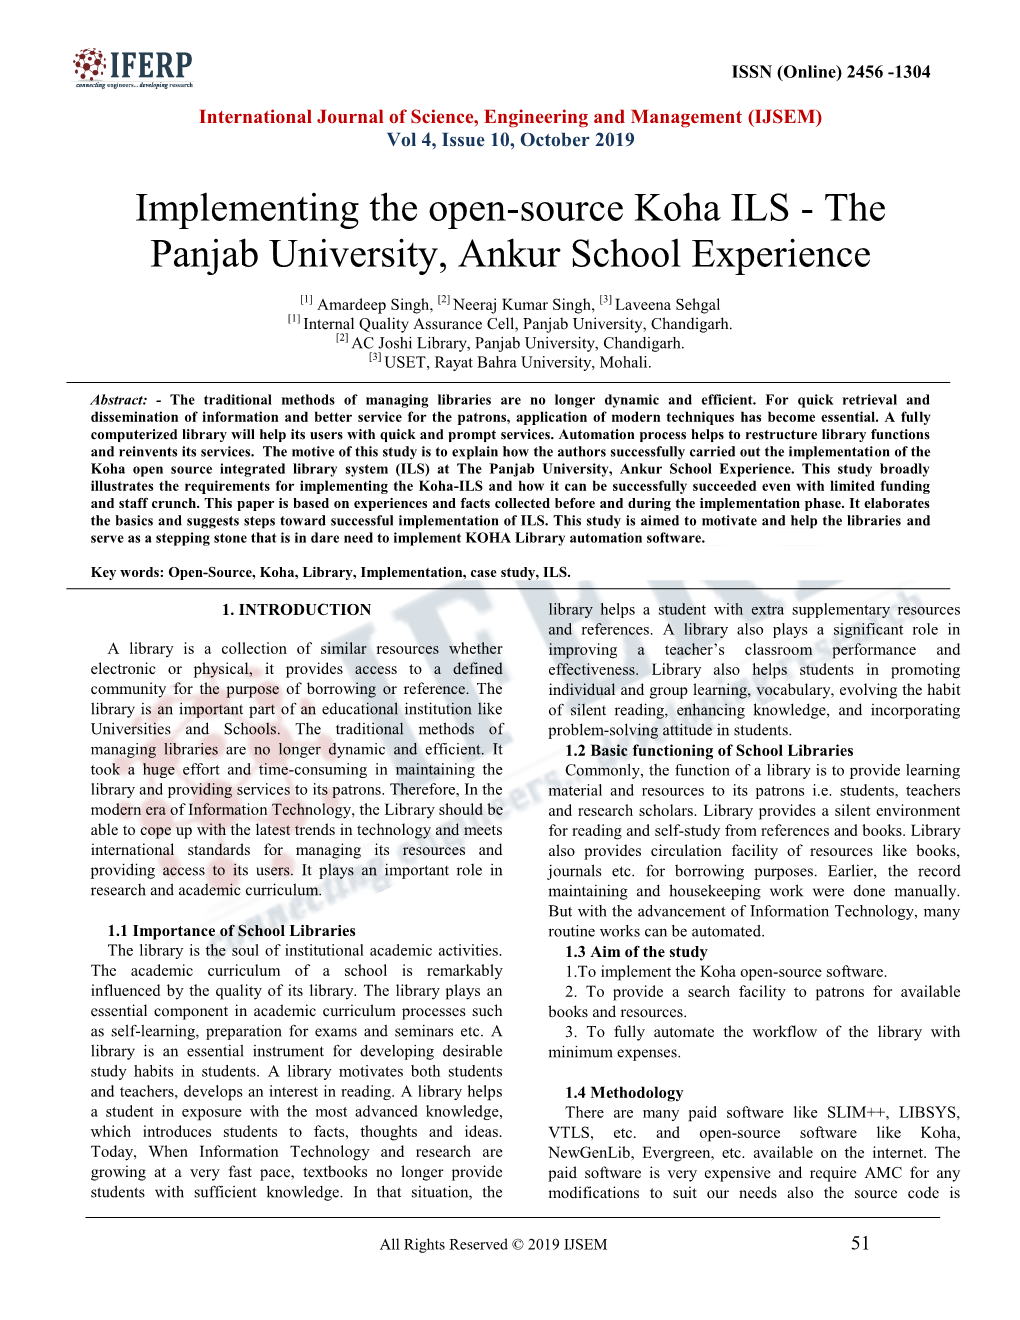 Implementing the Open-Source Koha ILS - the Panjab University, Ankur School Experience